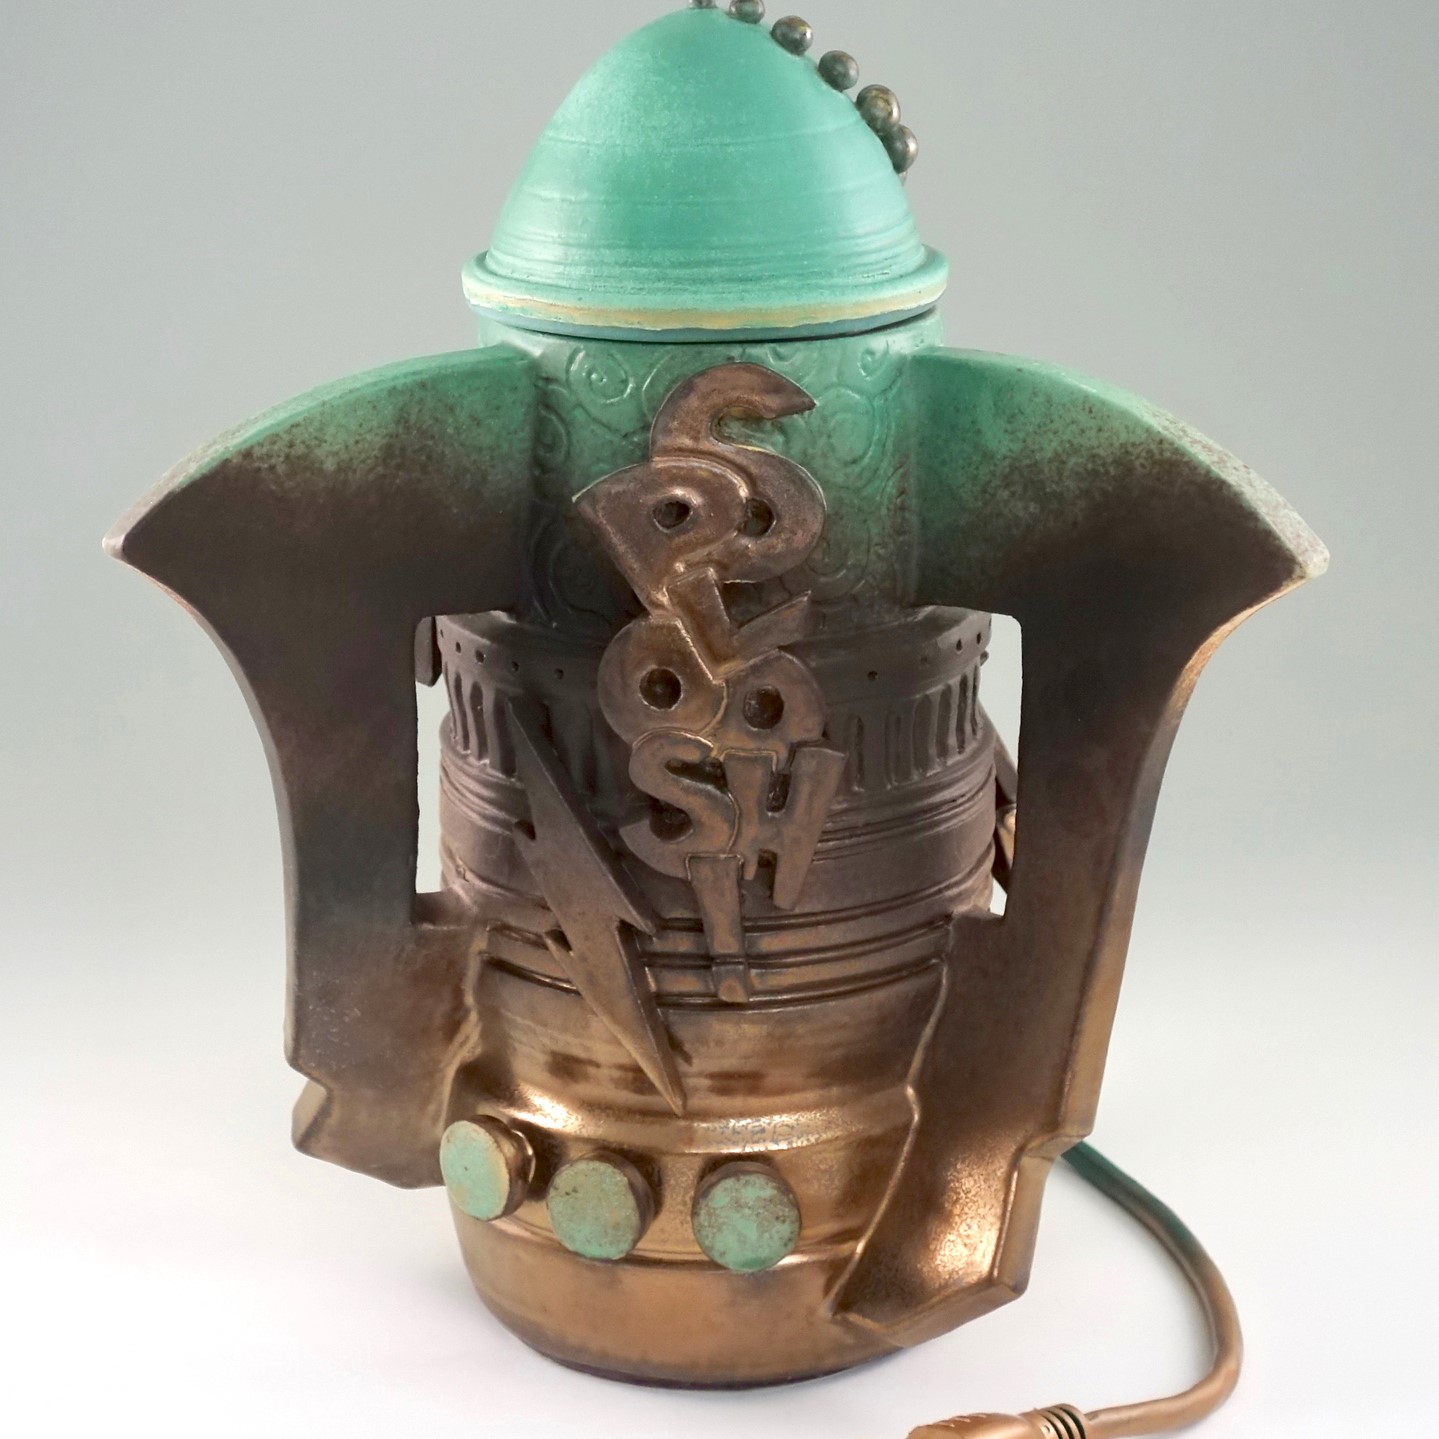 retro futuristic style bronze and mint colored jar that has a wall plug and the word "SPLOOSH" on the front with three mint colored buttons and a lightening strike.